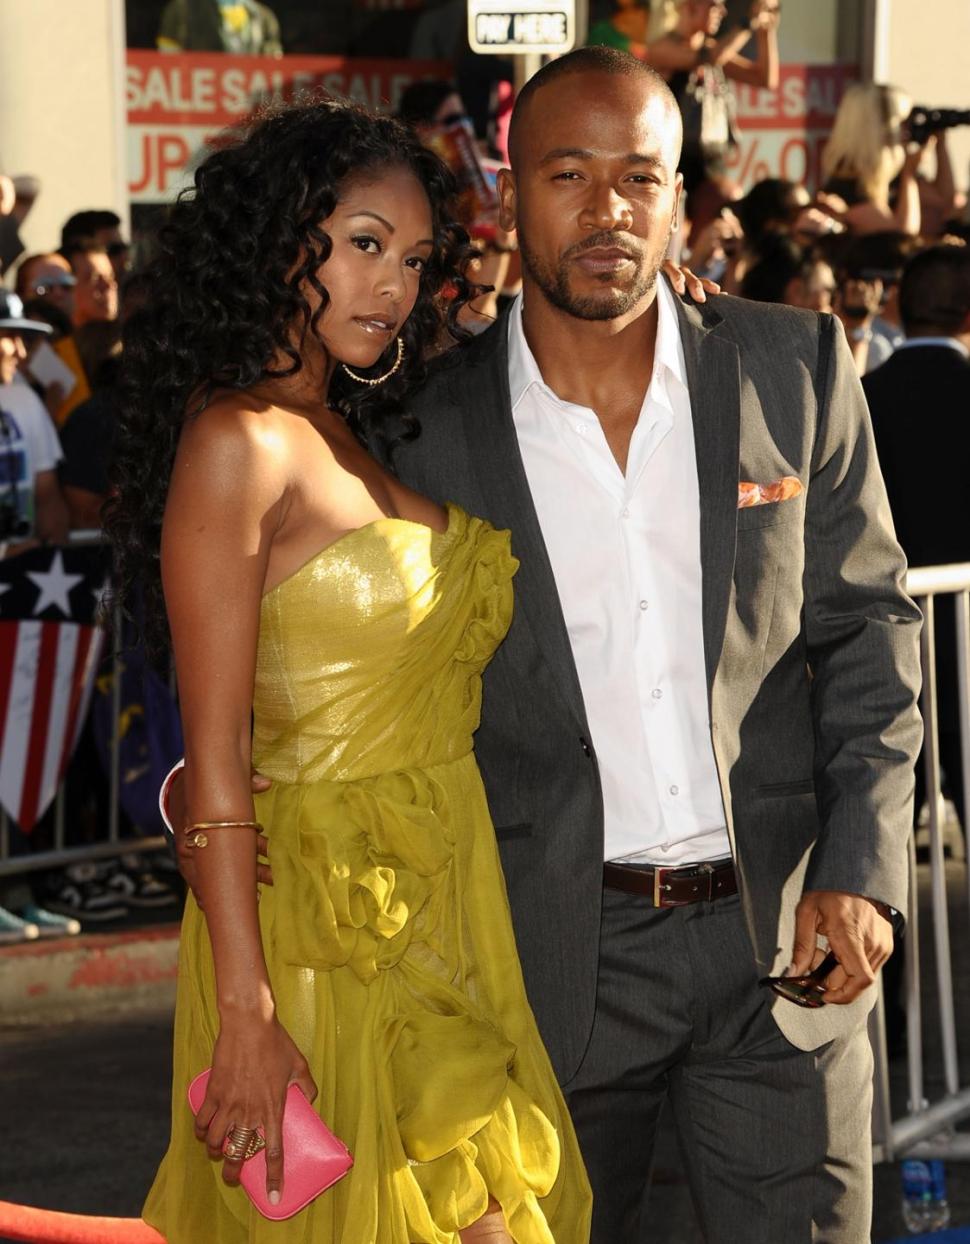 Columbus Short (R) and now estranged wife Tanee McCall attend the premiere of 'Captain America: The First Avenger' at the El Capitan Theatre on July 19, 2011 in Hollywood, Calif.